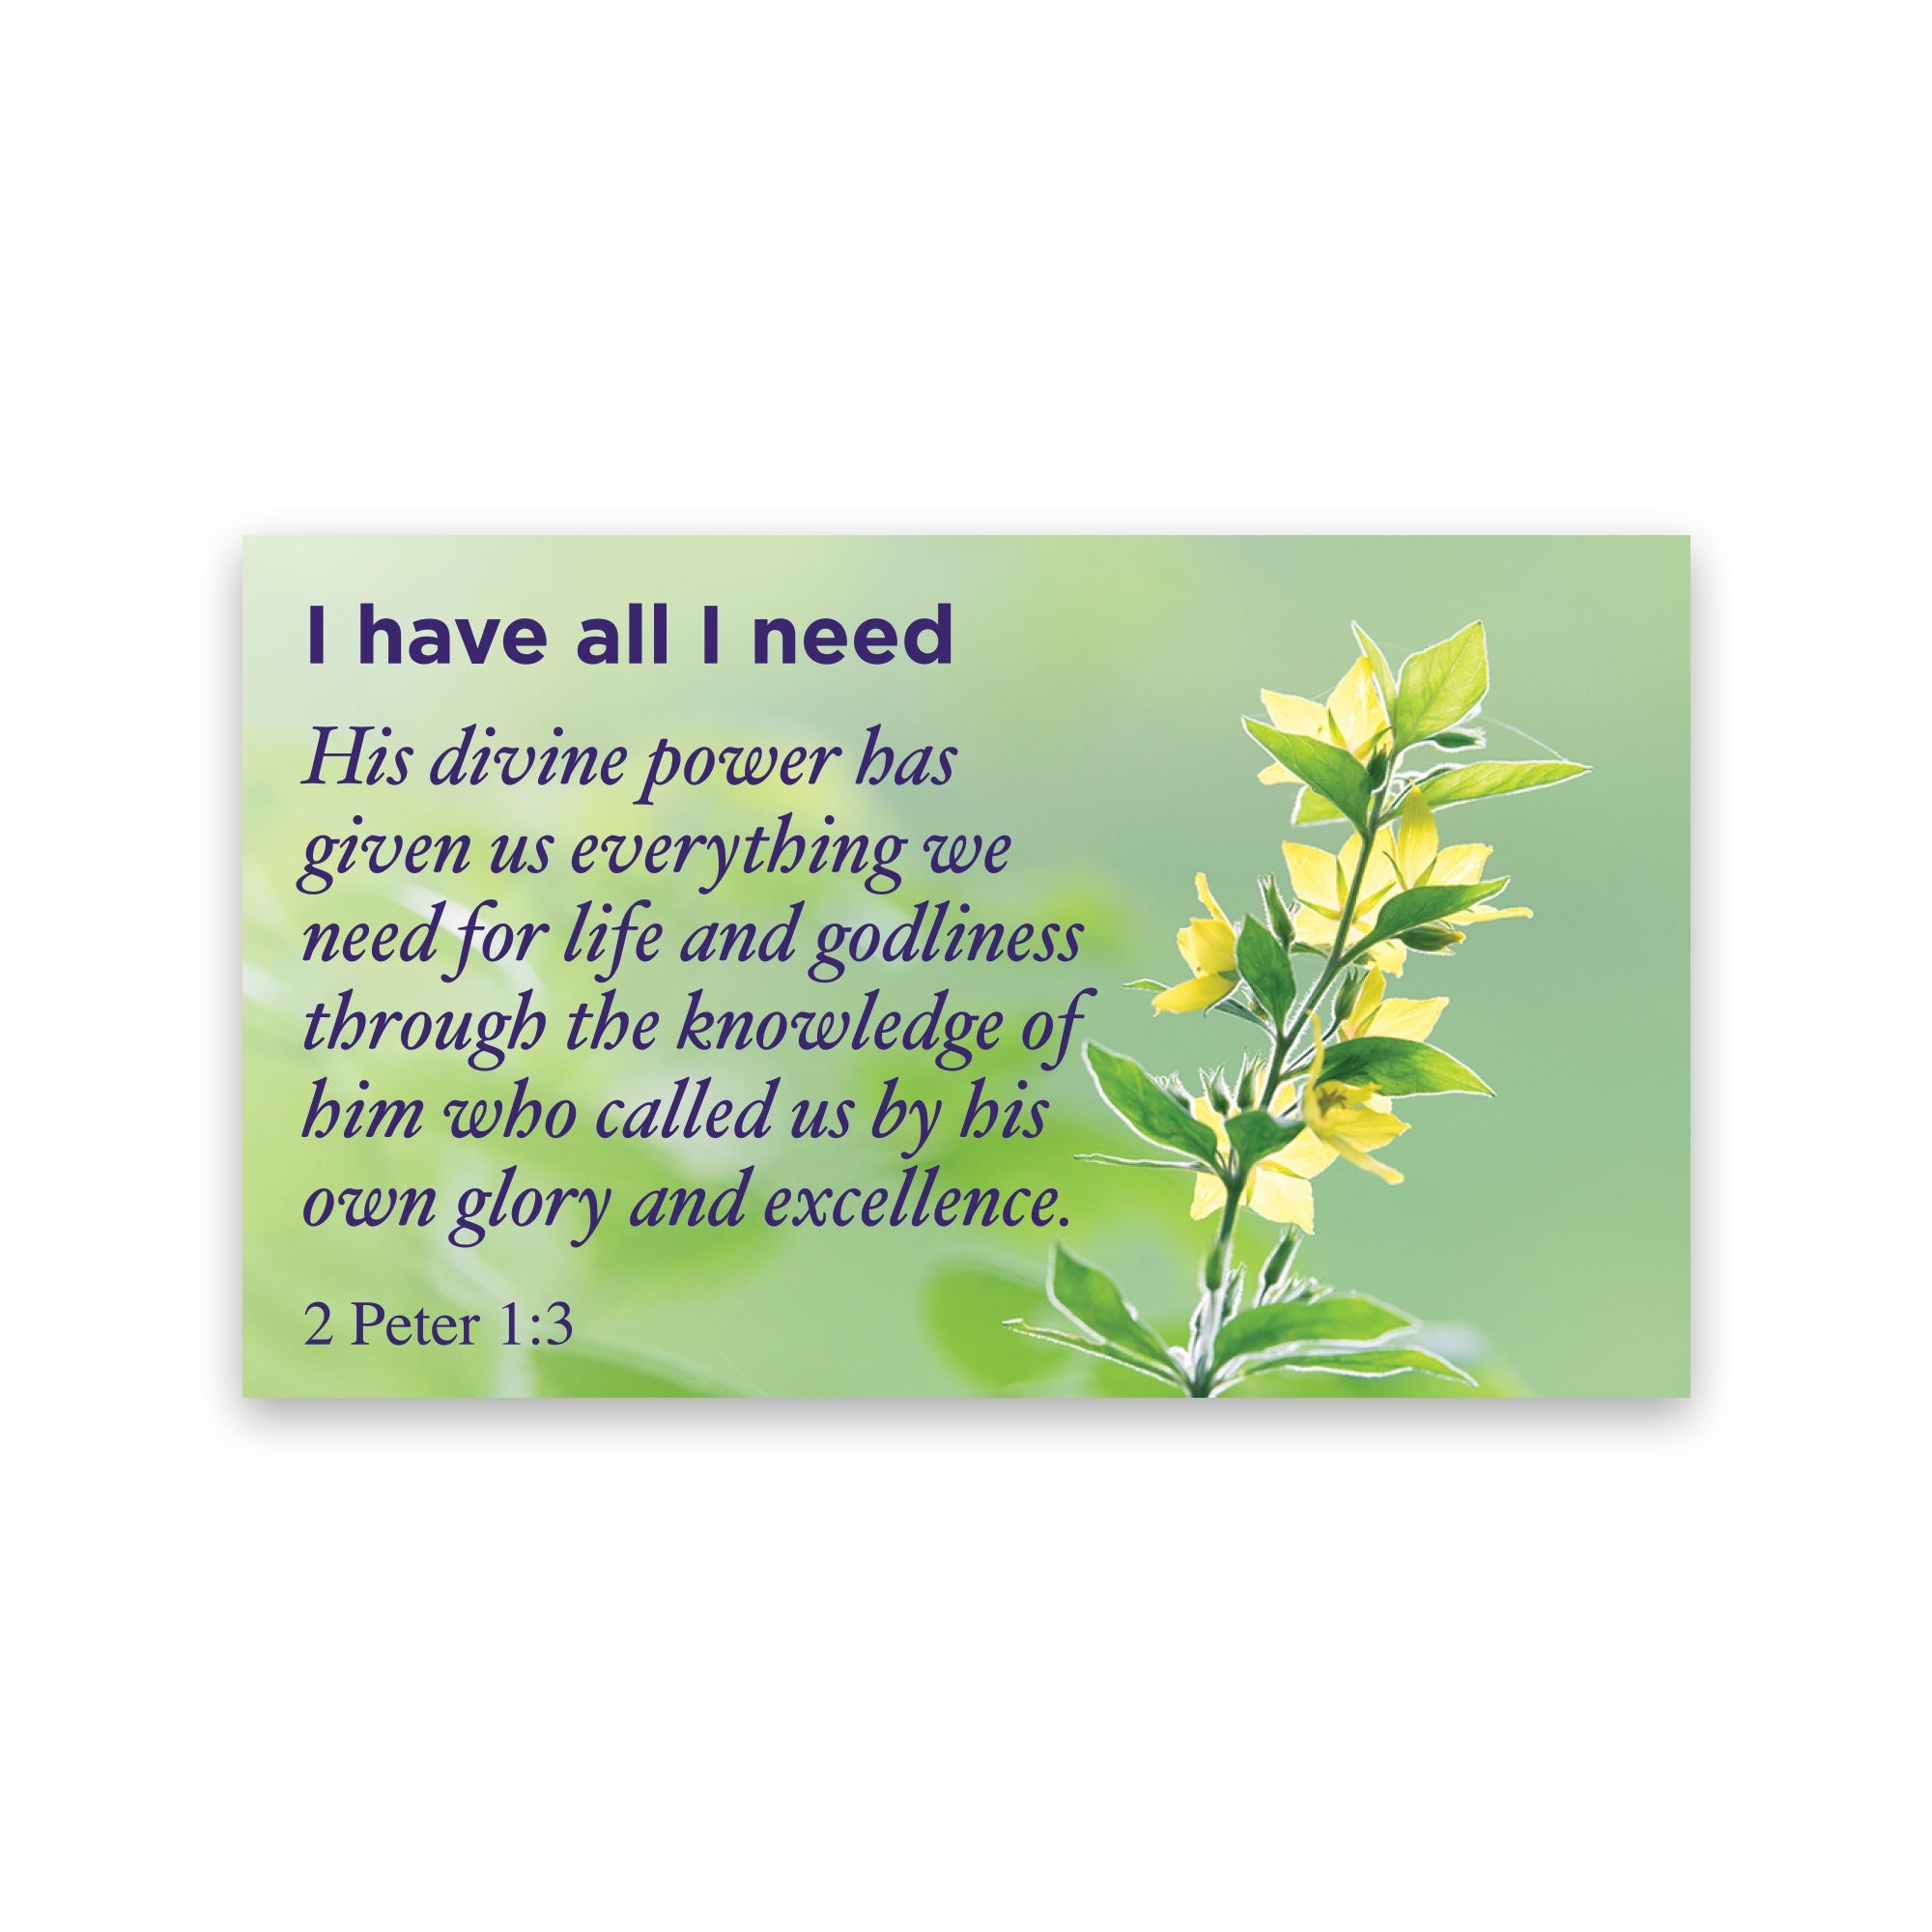 I have all I need, 1 Peter 1:3, Pass Along Scripture Cards, Pack of 25